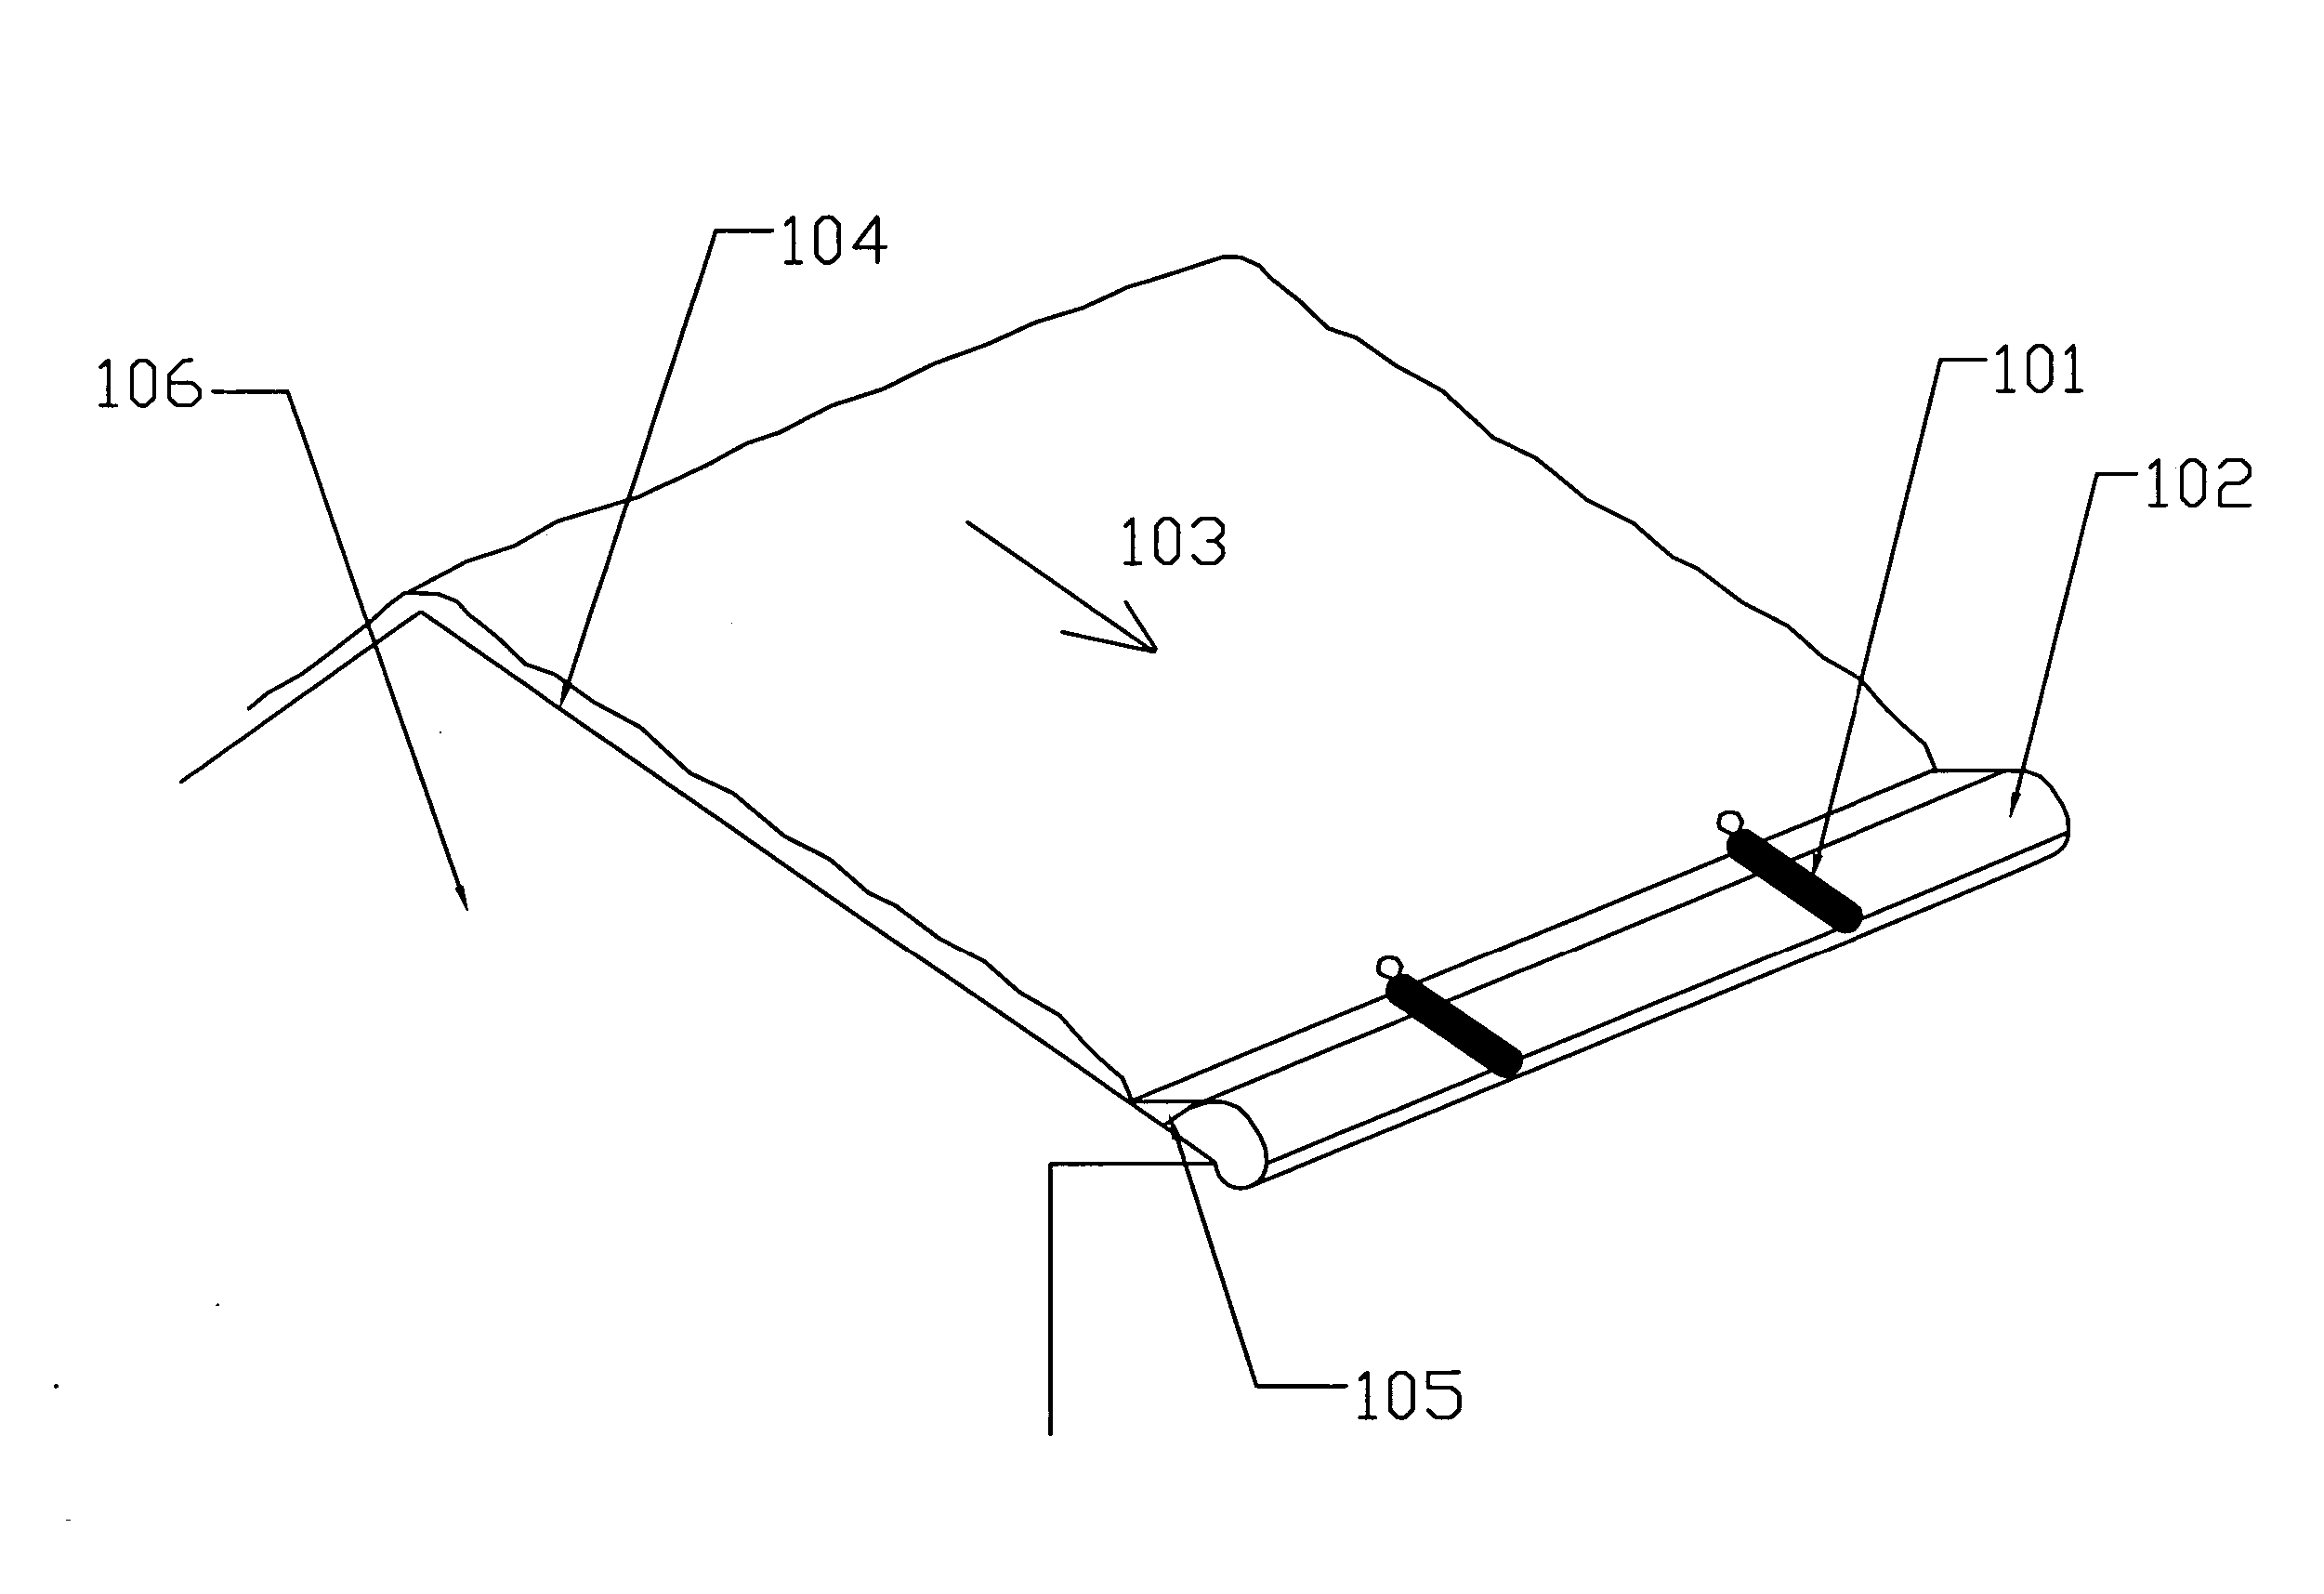 Method for breaching ice dams on the roof of a house